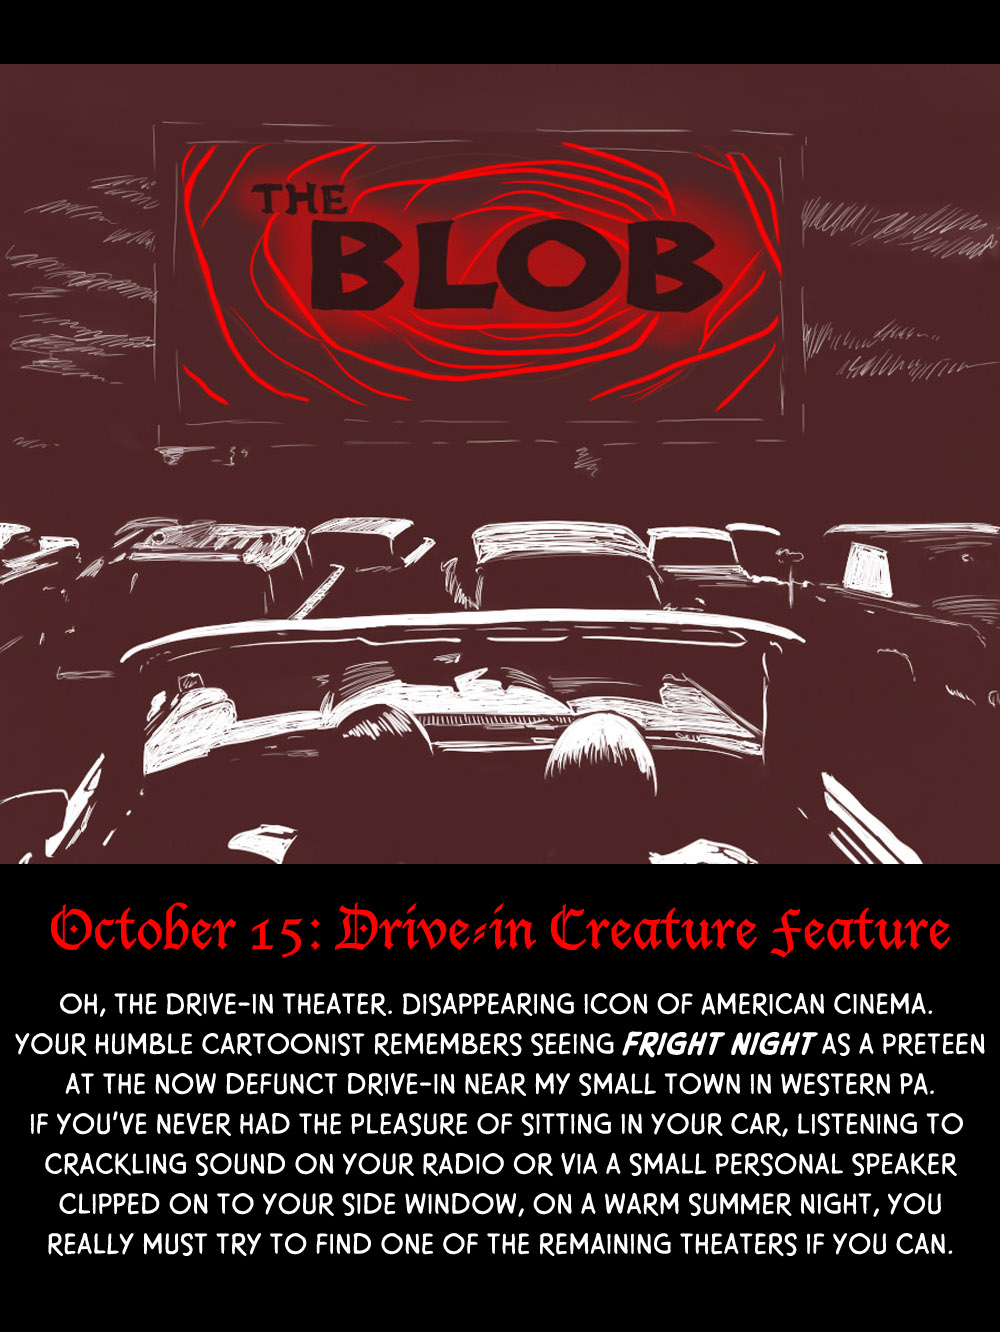 October 15: Drive-in Creature Feature